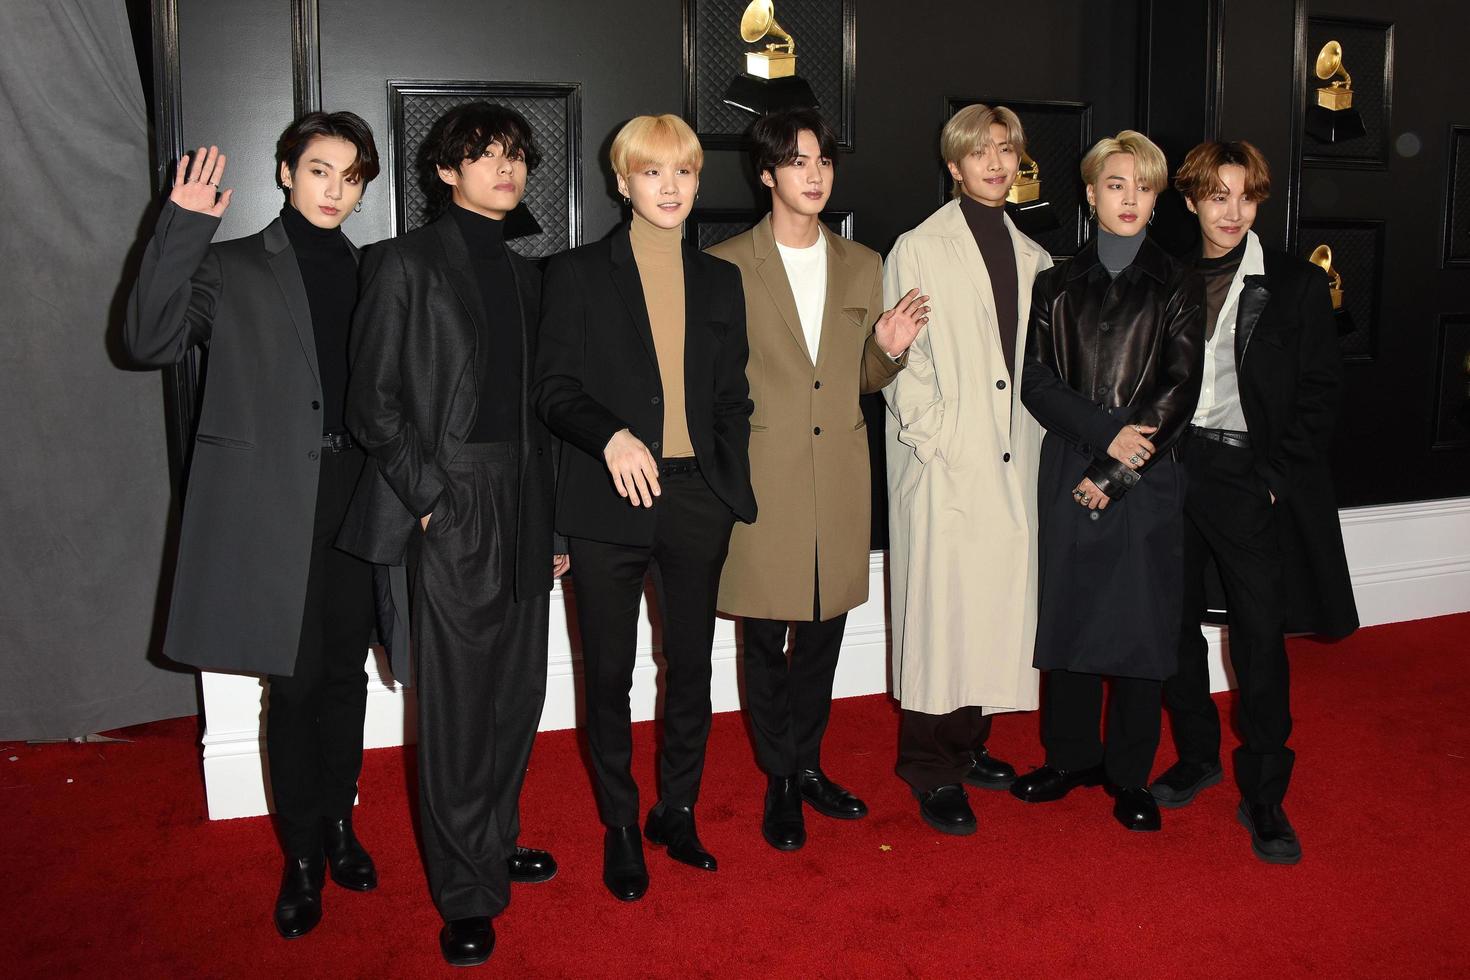 LOS ANGELES  JAN 26 - BTS at the 62nd Grammy Awards at the Staples Center on January 26, 2020 in Los Angeles, CA photo